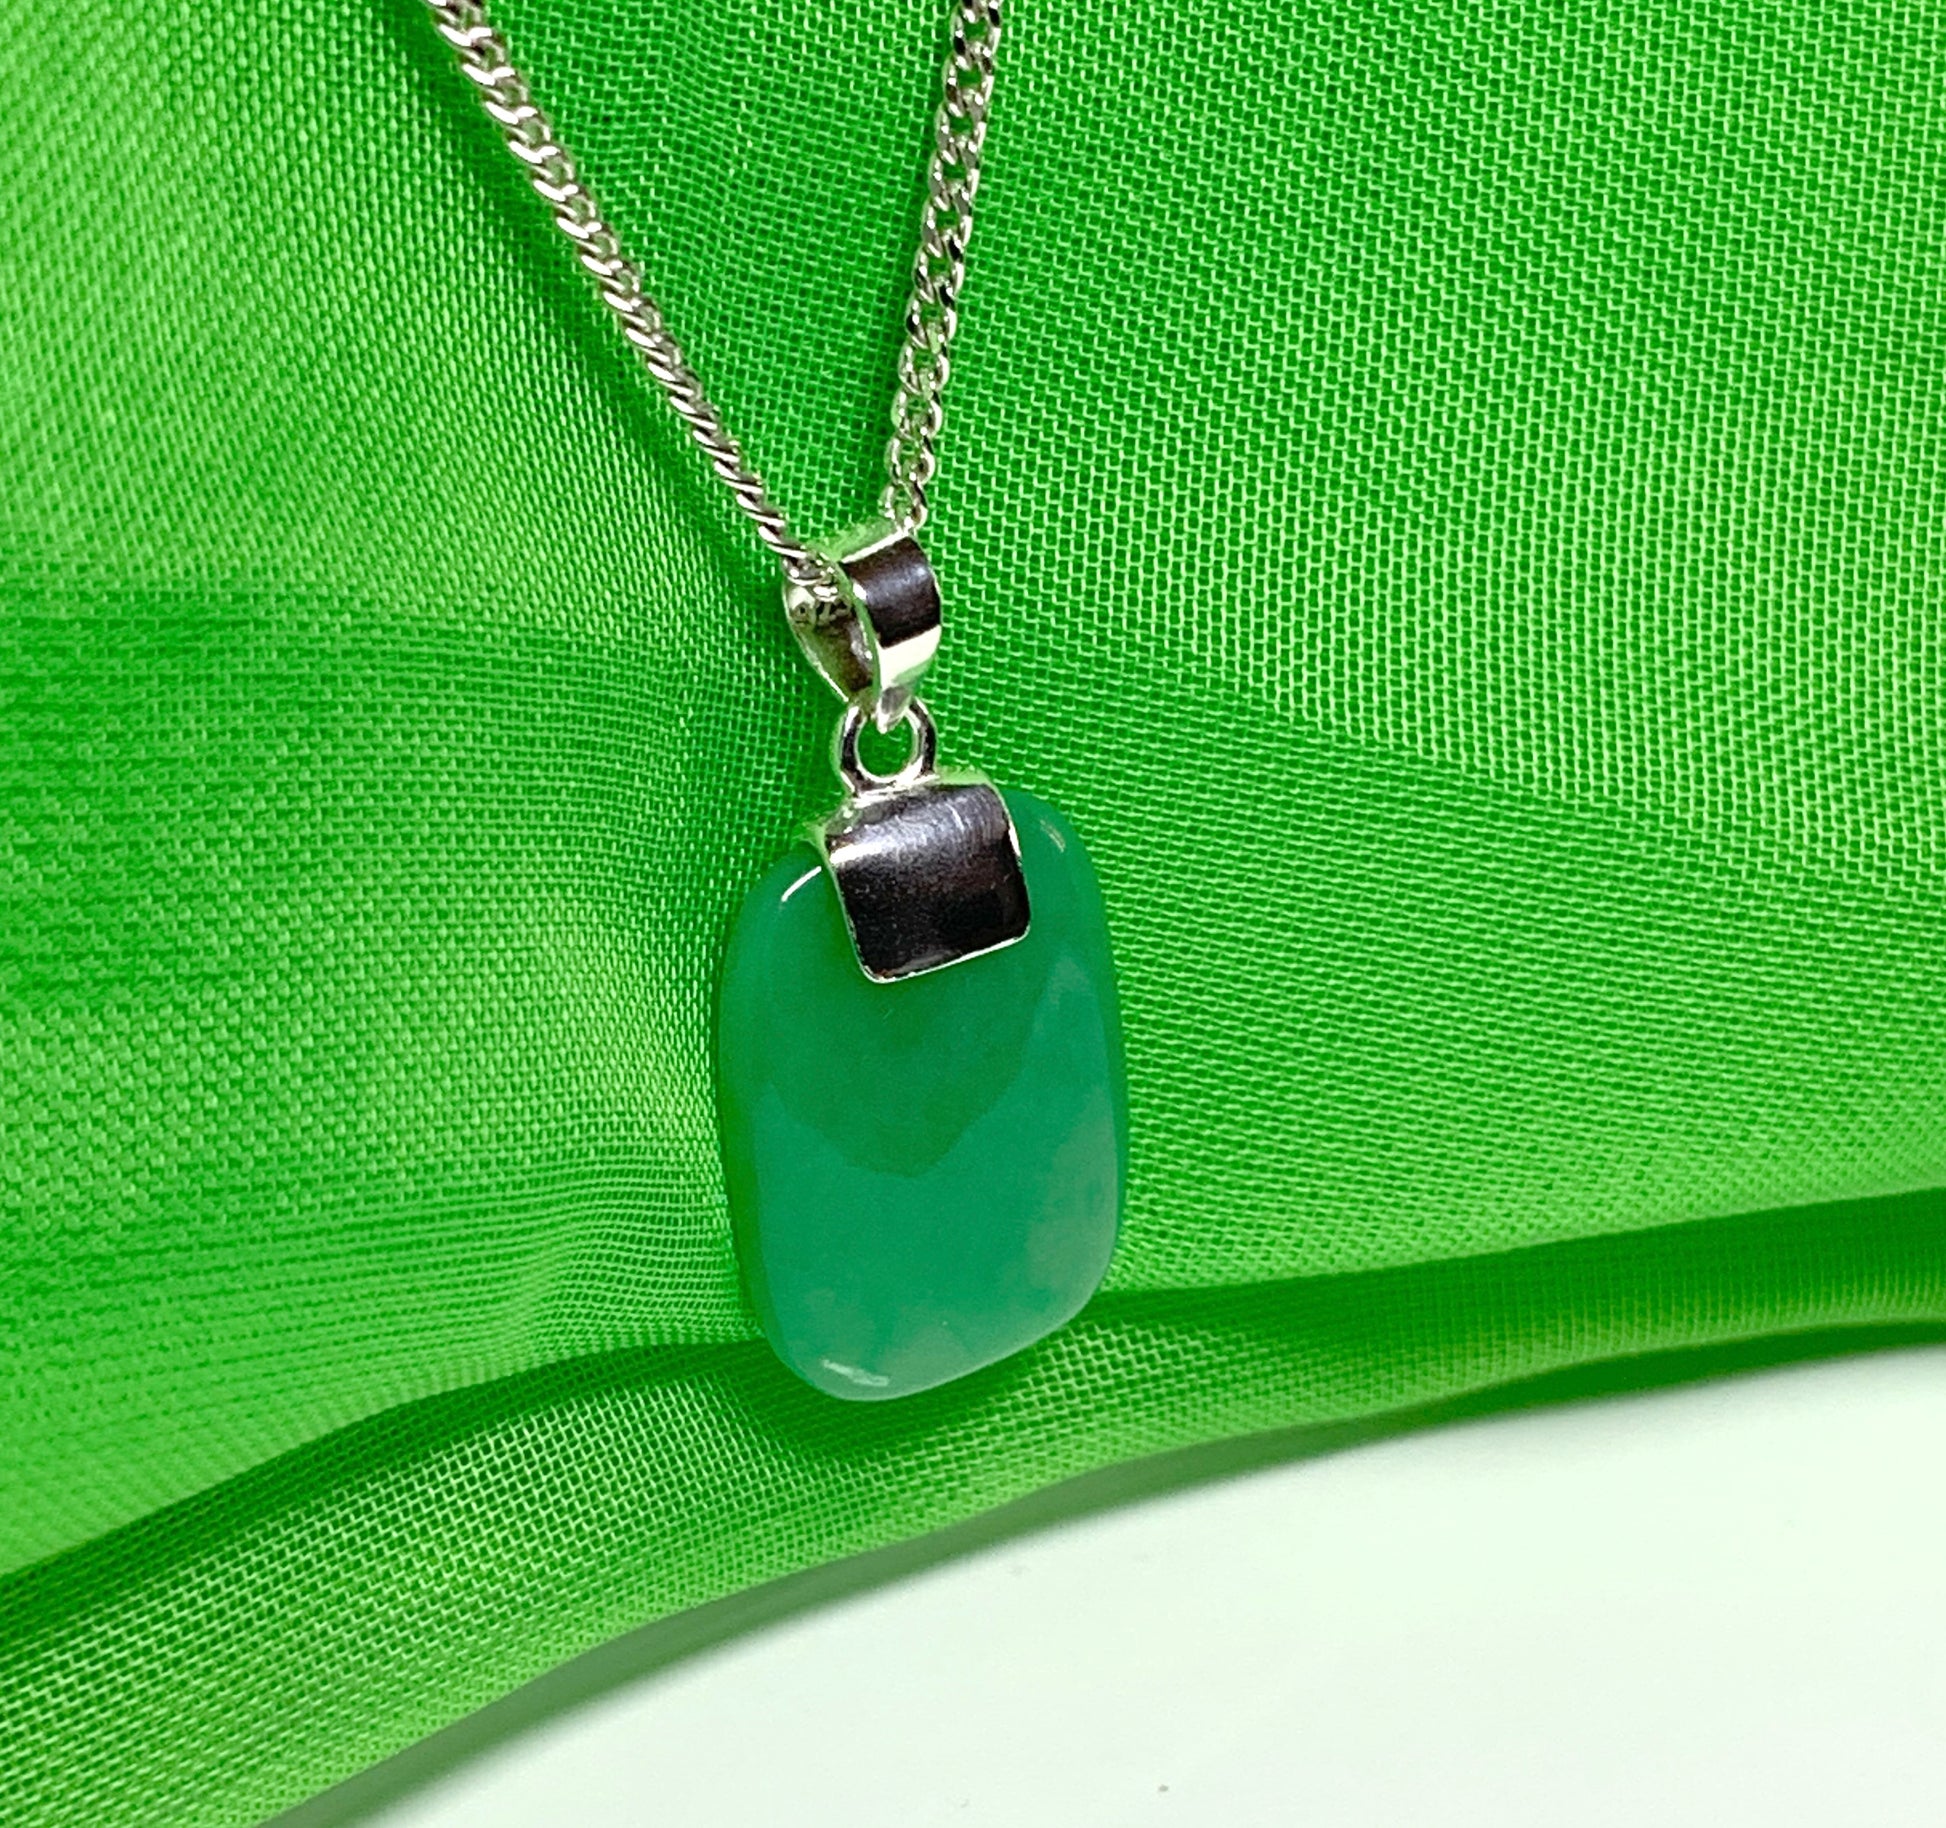 Real green jade necklace cushion shaped stone sterling silver pendant